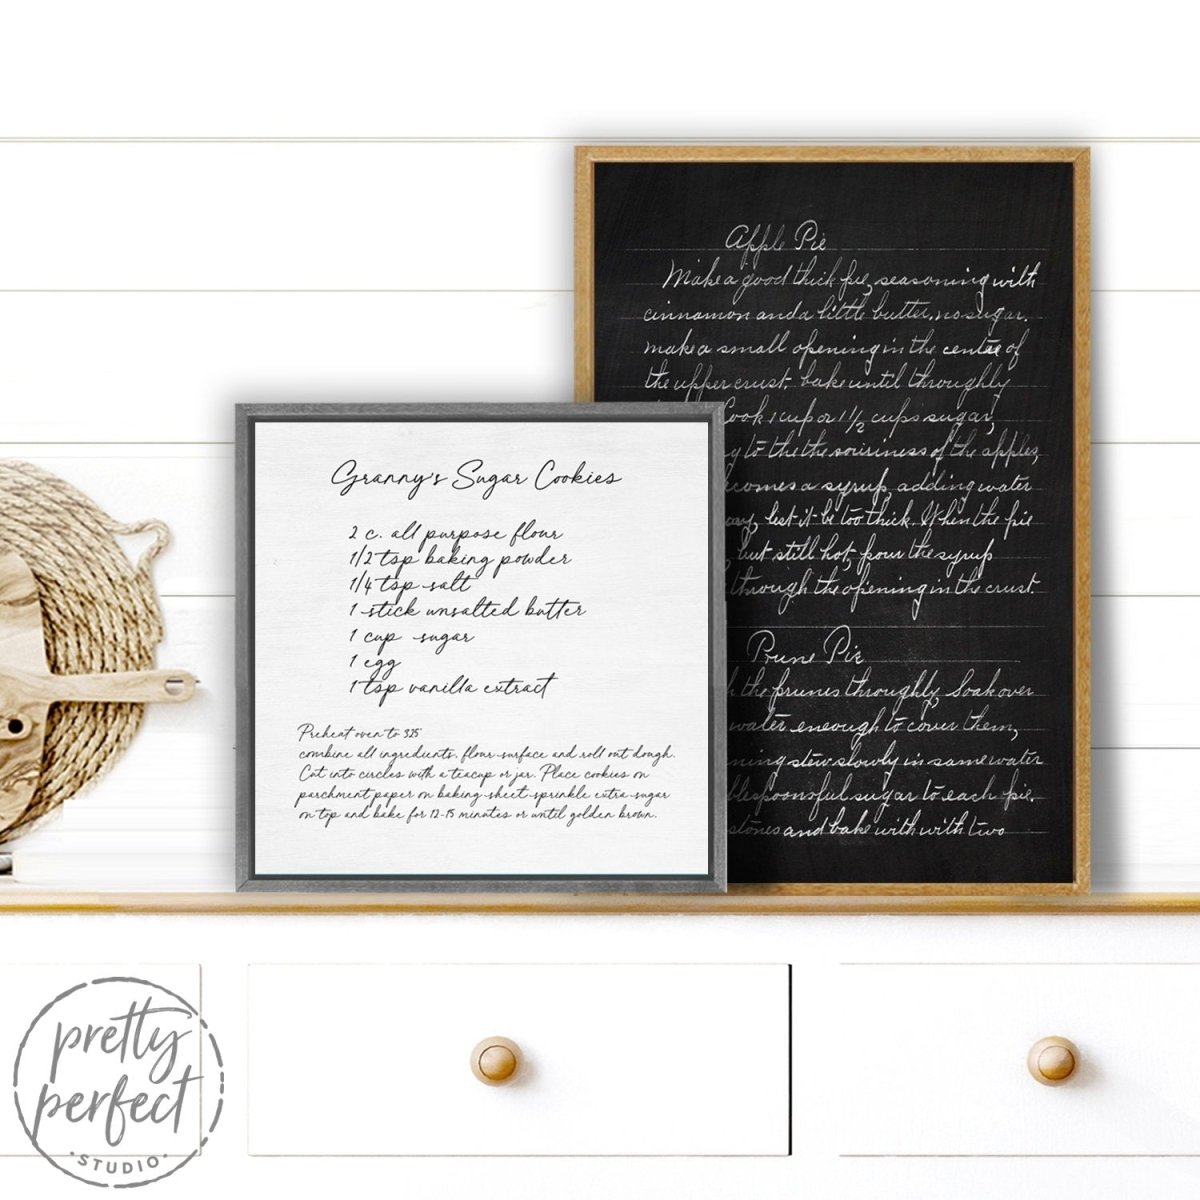 Personalized Family Recipe Sign With Your Choice of Light or Dark Background Sitting on Shelf - Pretty Perfect Studio